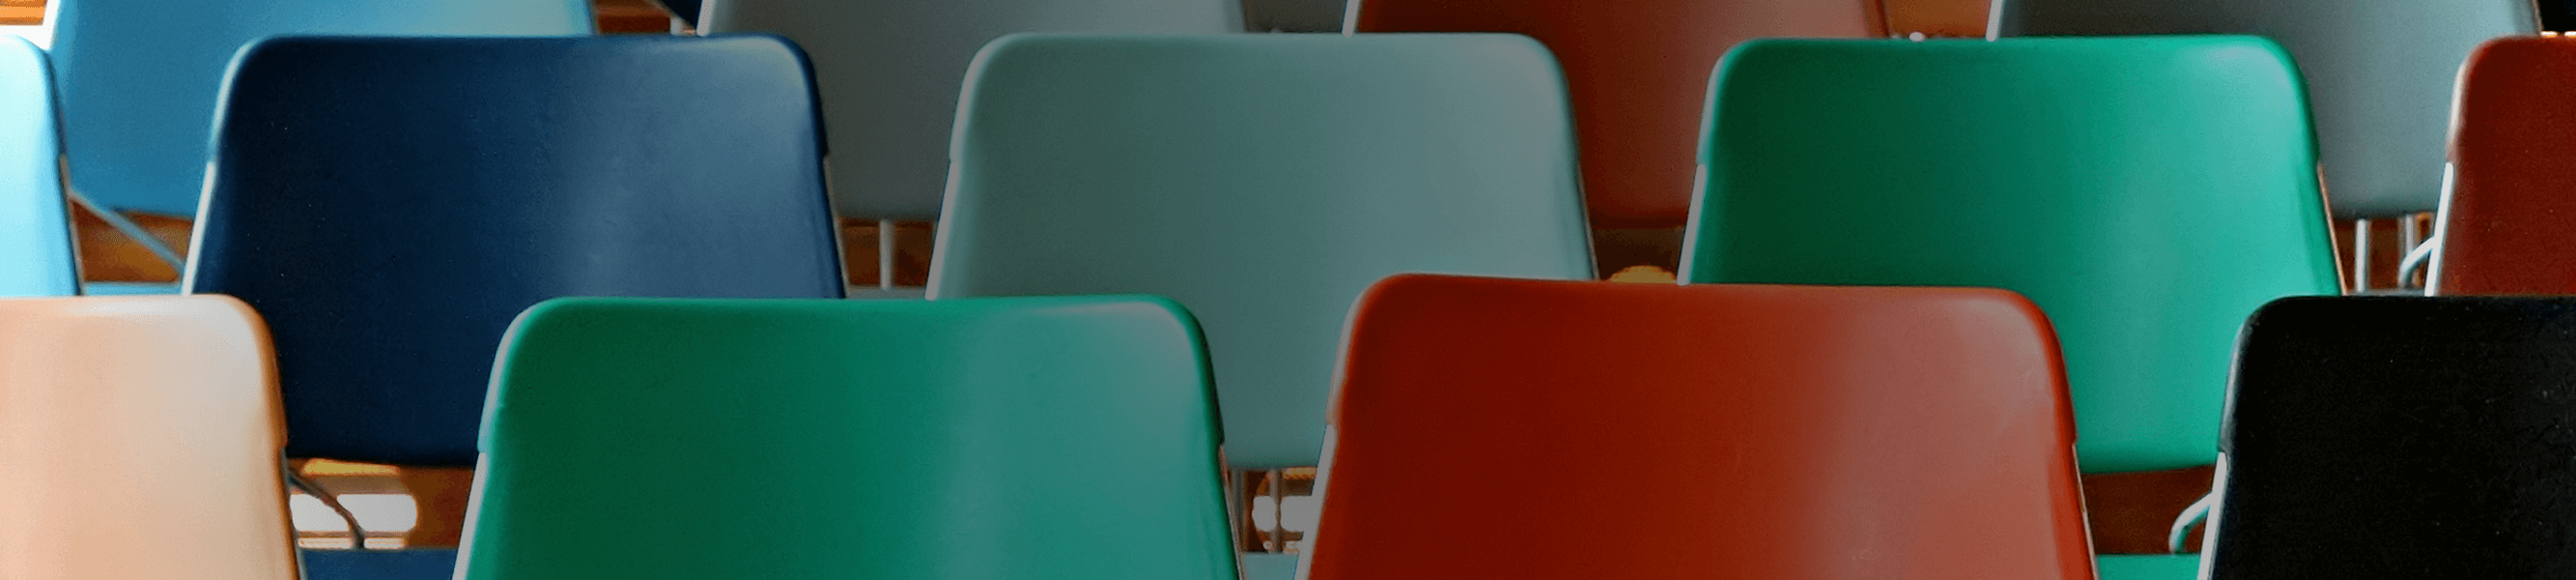 Several Colorful Chairs Arranged in Rows